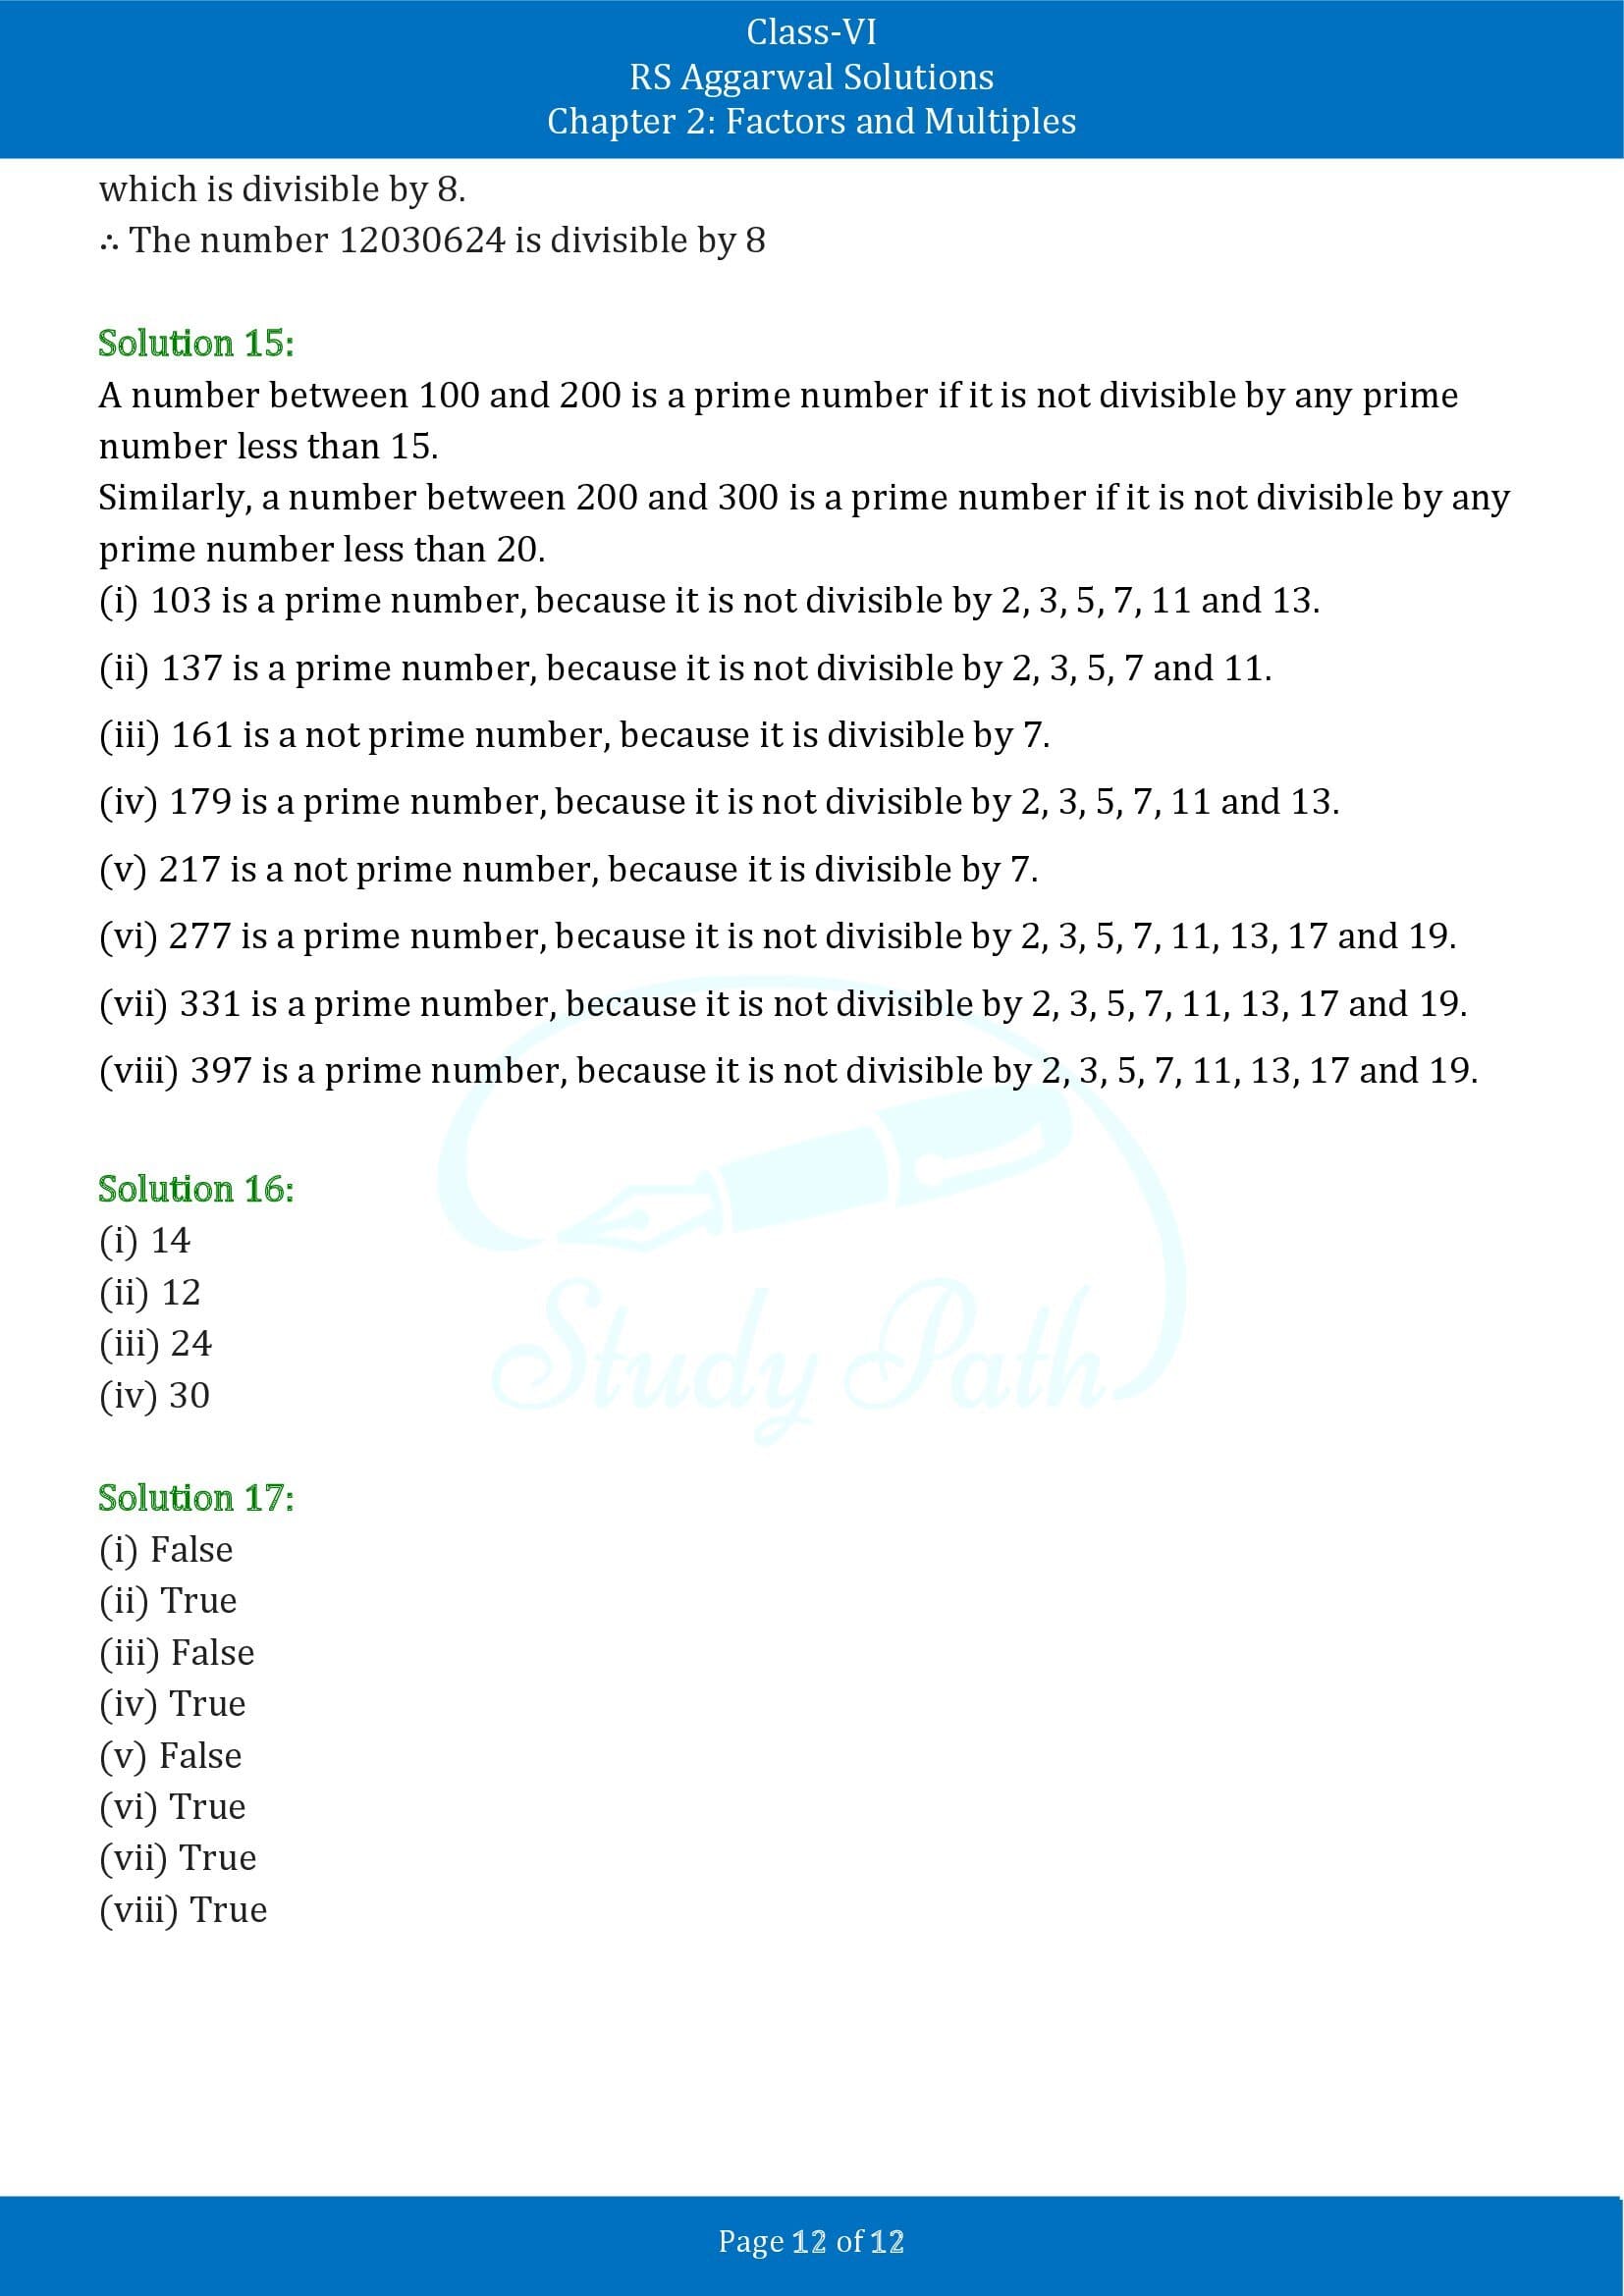 RS Aggarwal Solutions Class 6 Chapter 2 Factors and Multiples Exercise 2B 00012